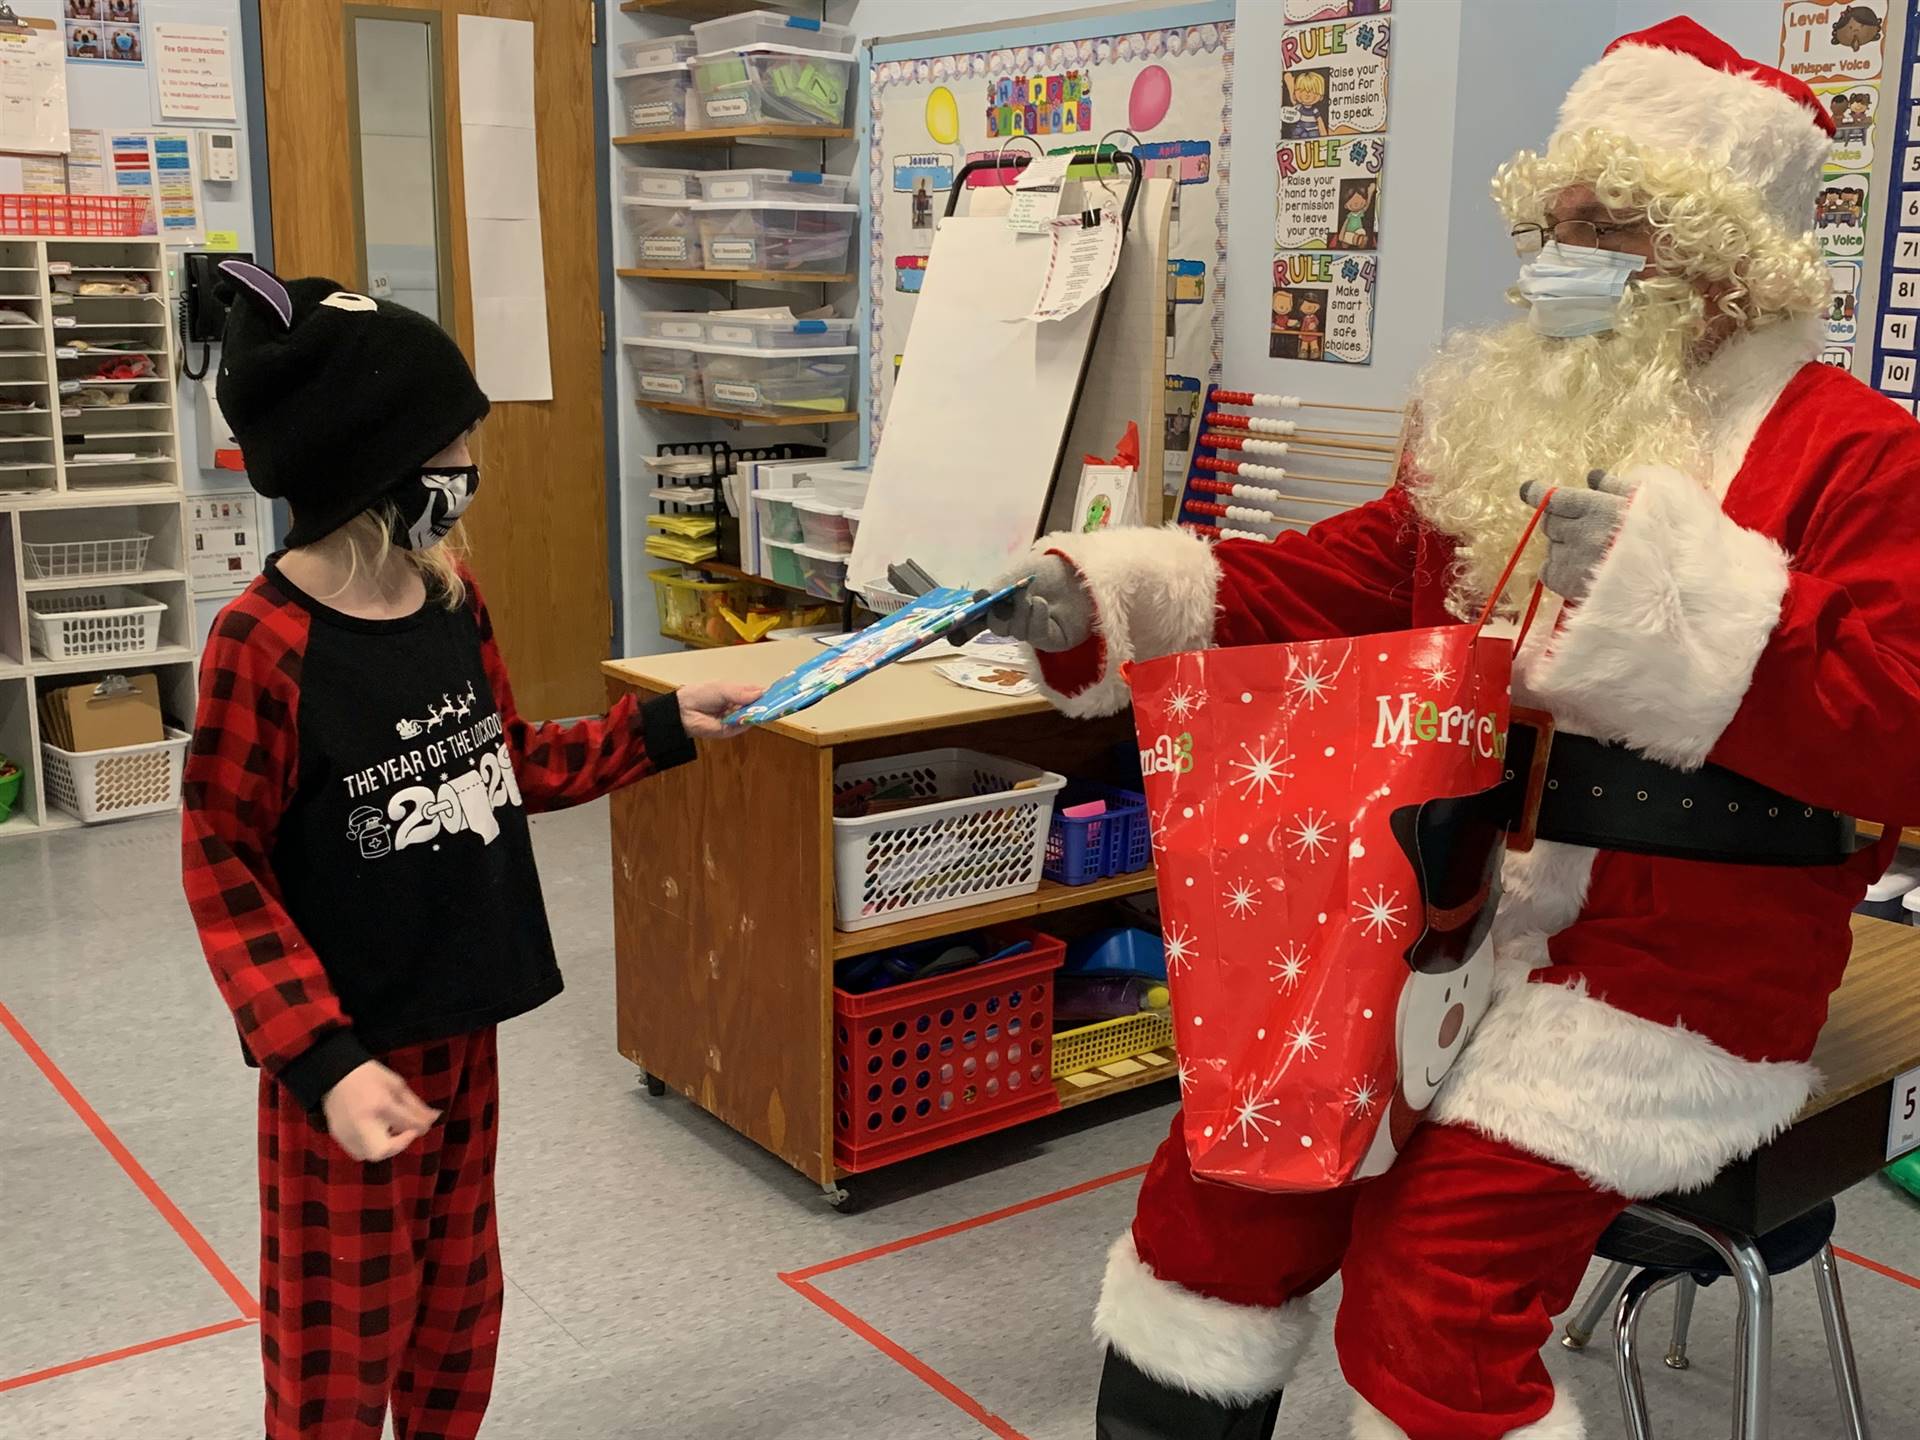 Student accepts gift from Santa